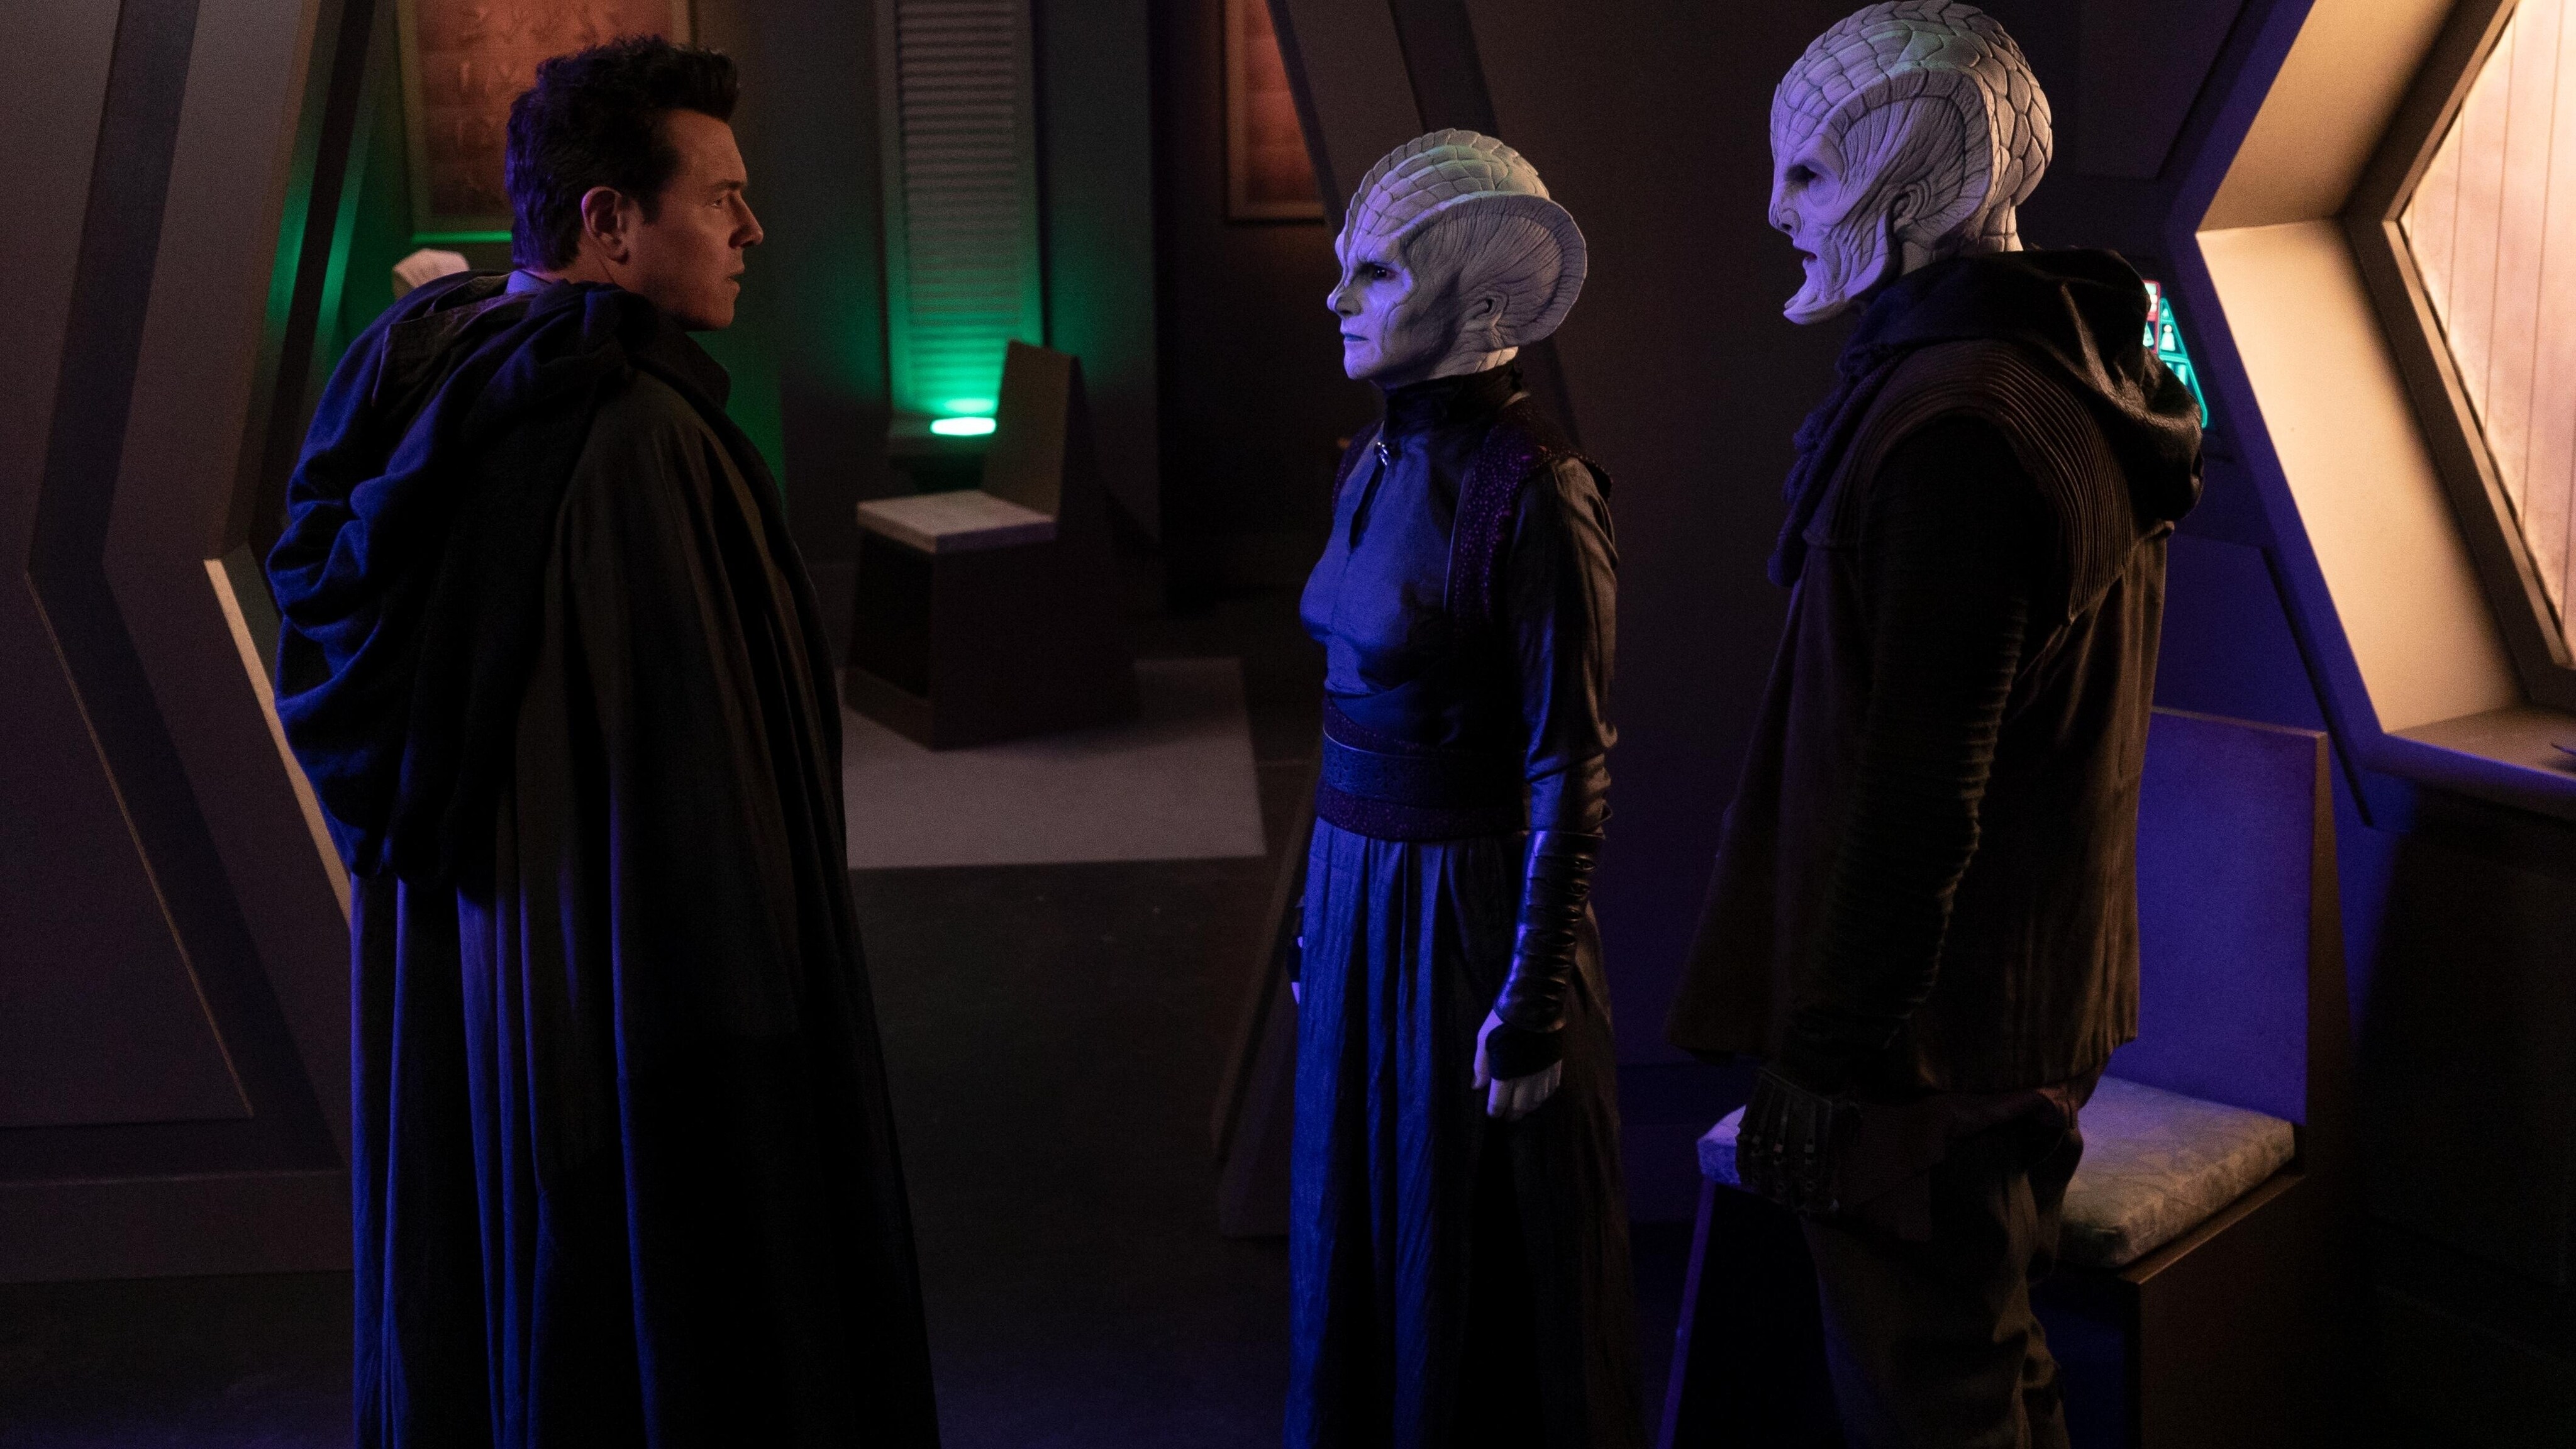 The Orville: New Horizons -- “Gently Falling Rain” - Episode 304 -- The Orville crew leads a Union delegation to sign a peace treaty with the Krill. Capt. Ed Mercer (Seth MacFarlane), shown. (Photo by: Kevin Estrada/Hulu)